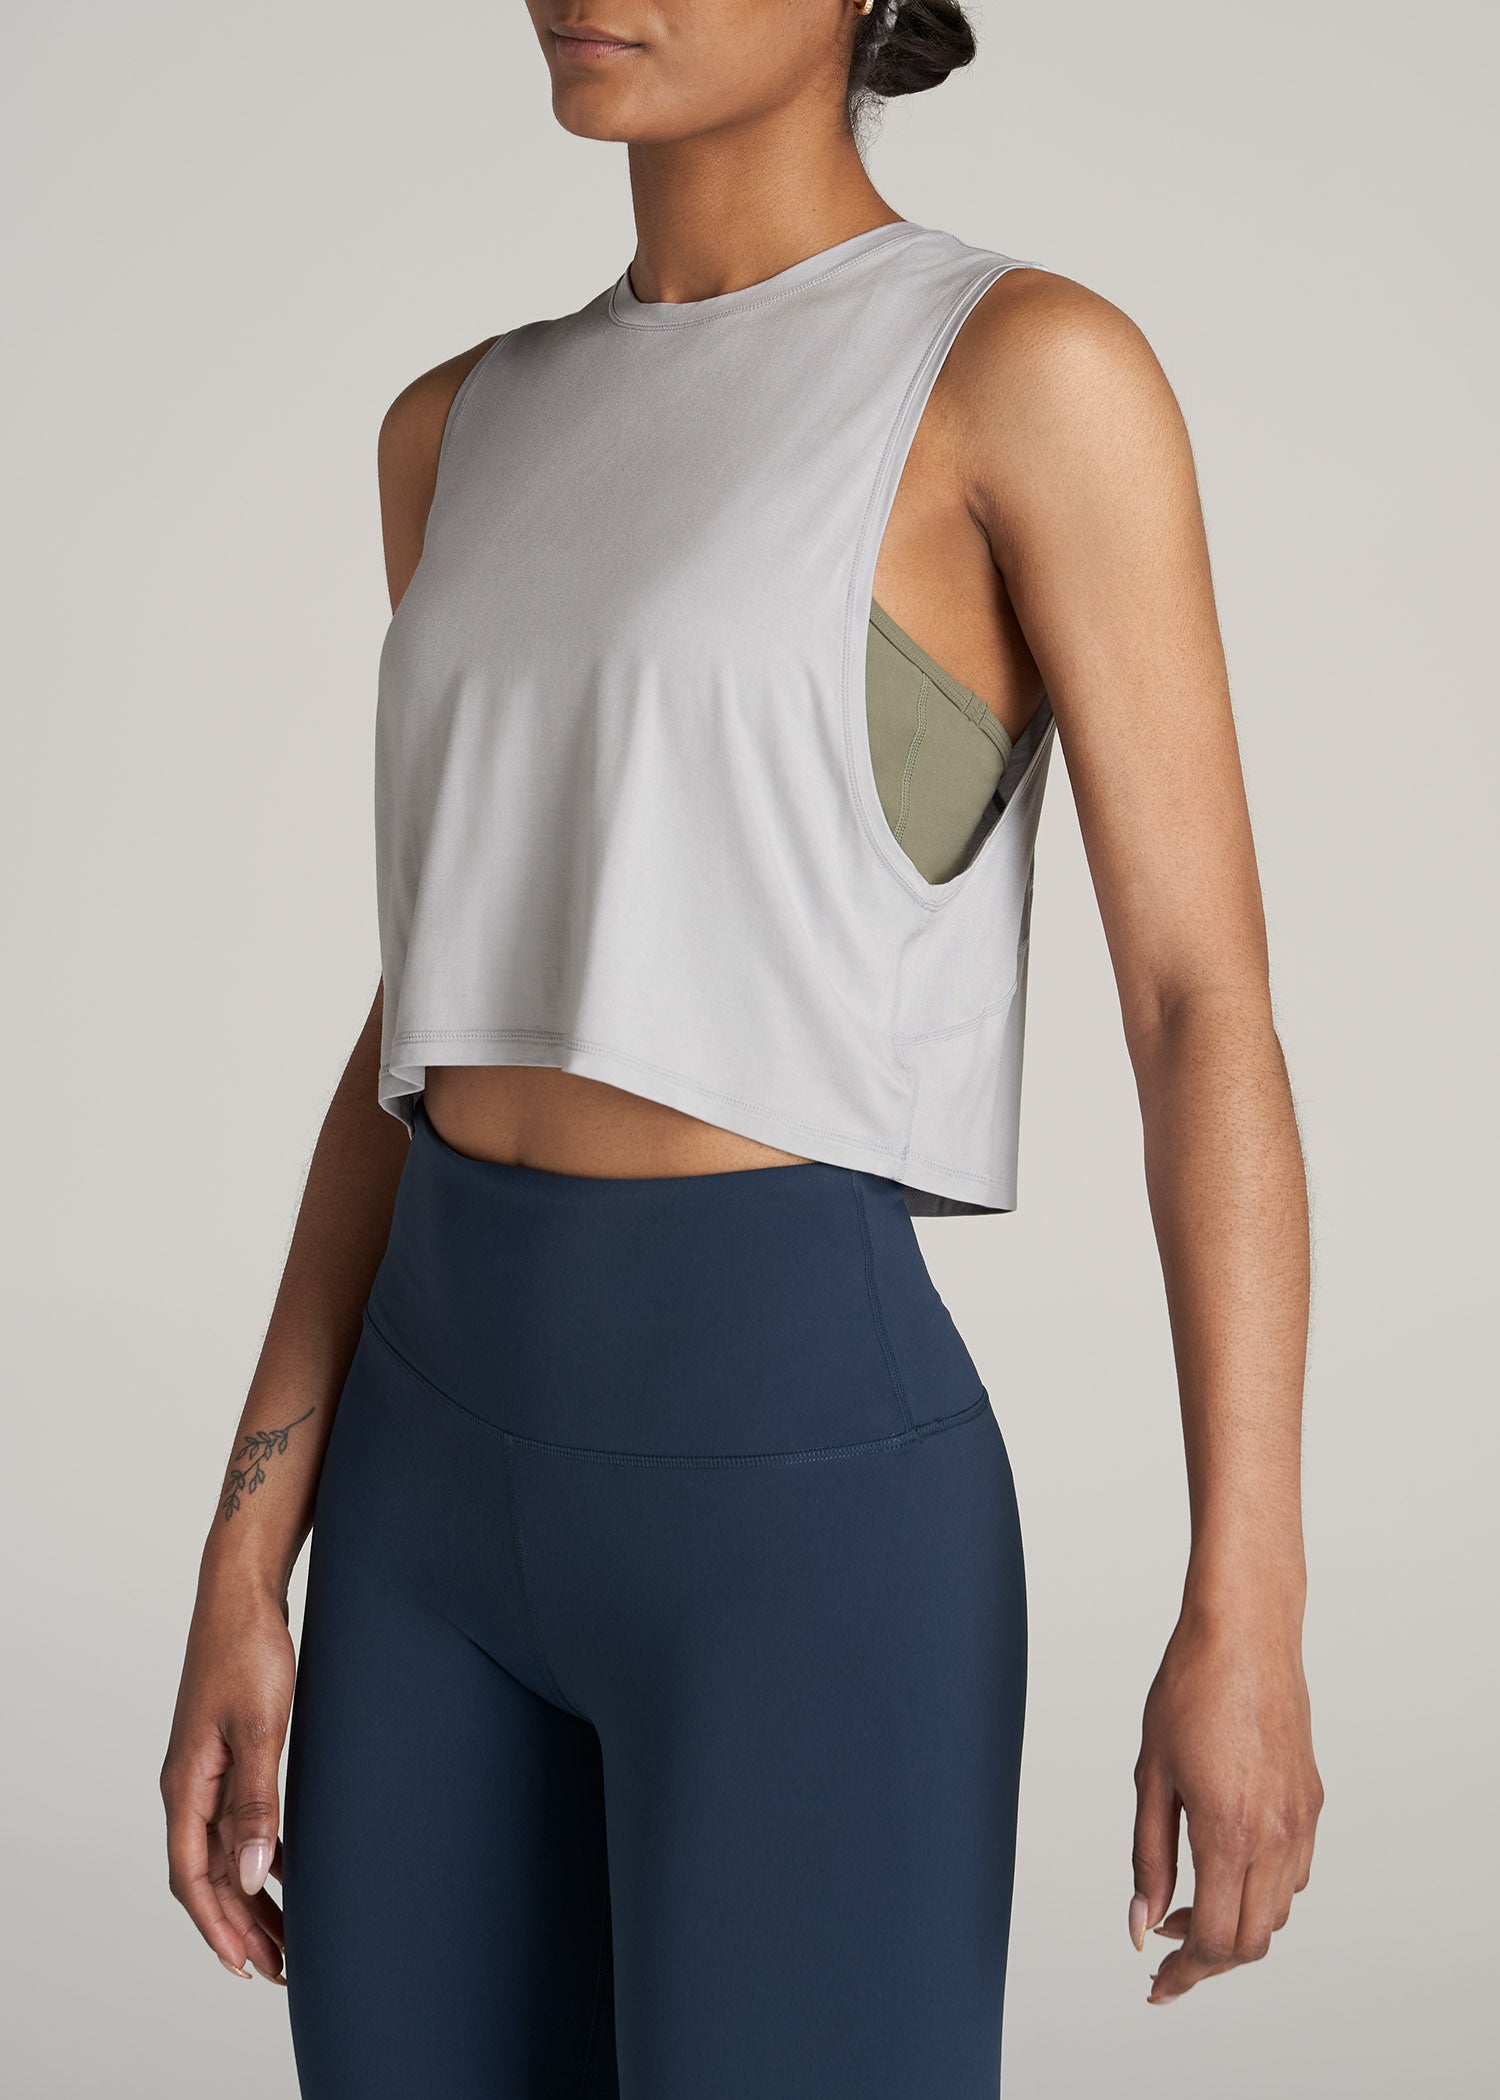 Athletic Cropped Muscle Tank Top for Tall Women in Silver